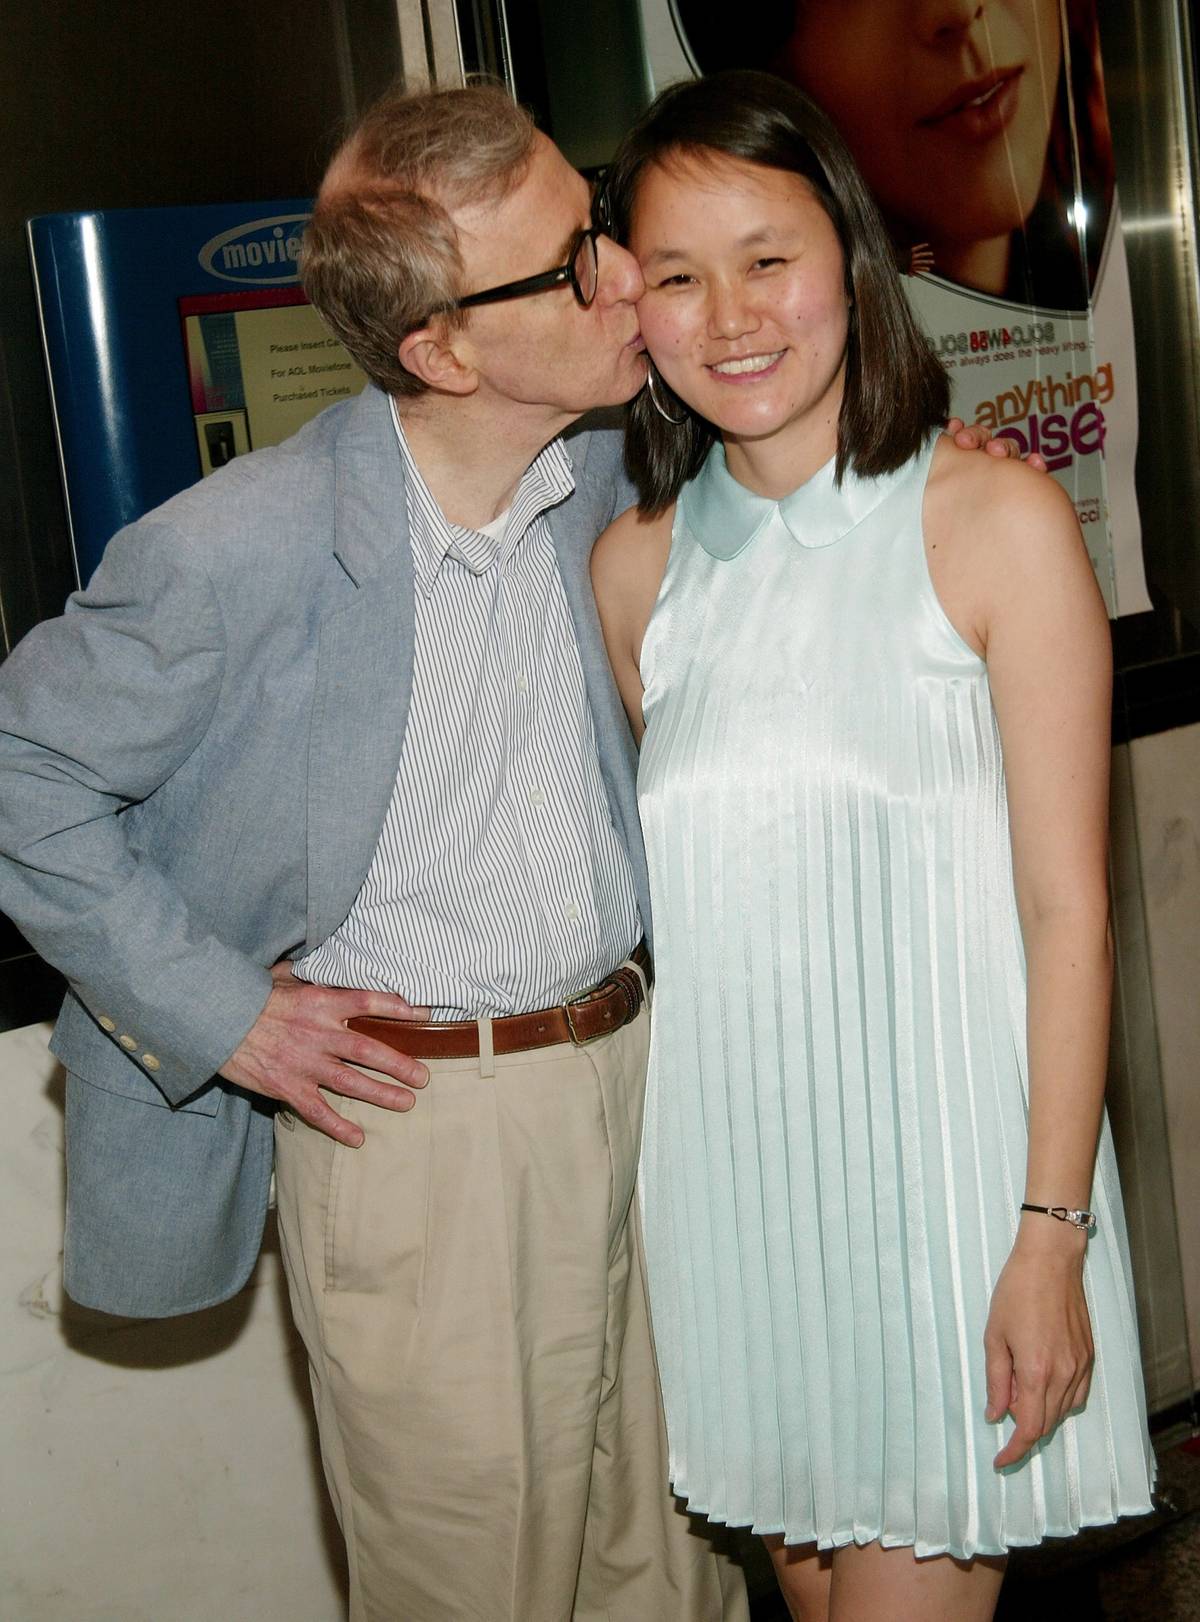 Director/actor Woody Allen kisses his wife Soon-Yi Previn as they attend a special screening of DreamWorks Pictures’ ‘Anything Else’ at the Paris Theatre September 16, 2003 in New York City. (Photo by Evan Agostini/Getty Images)